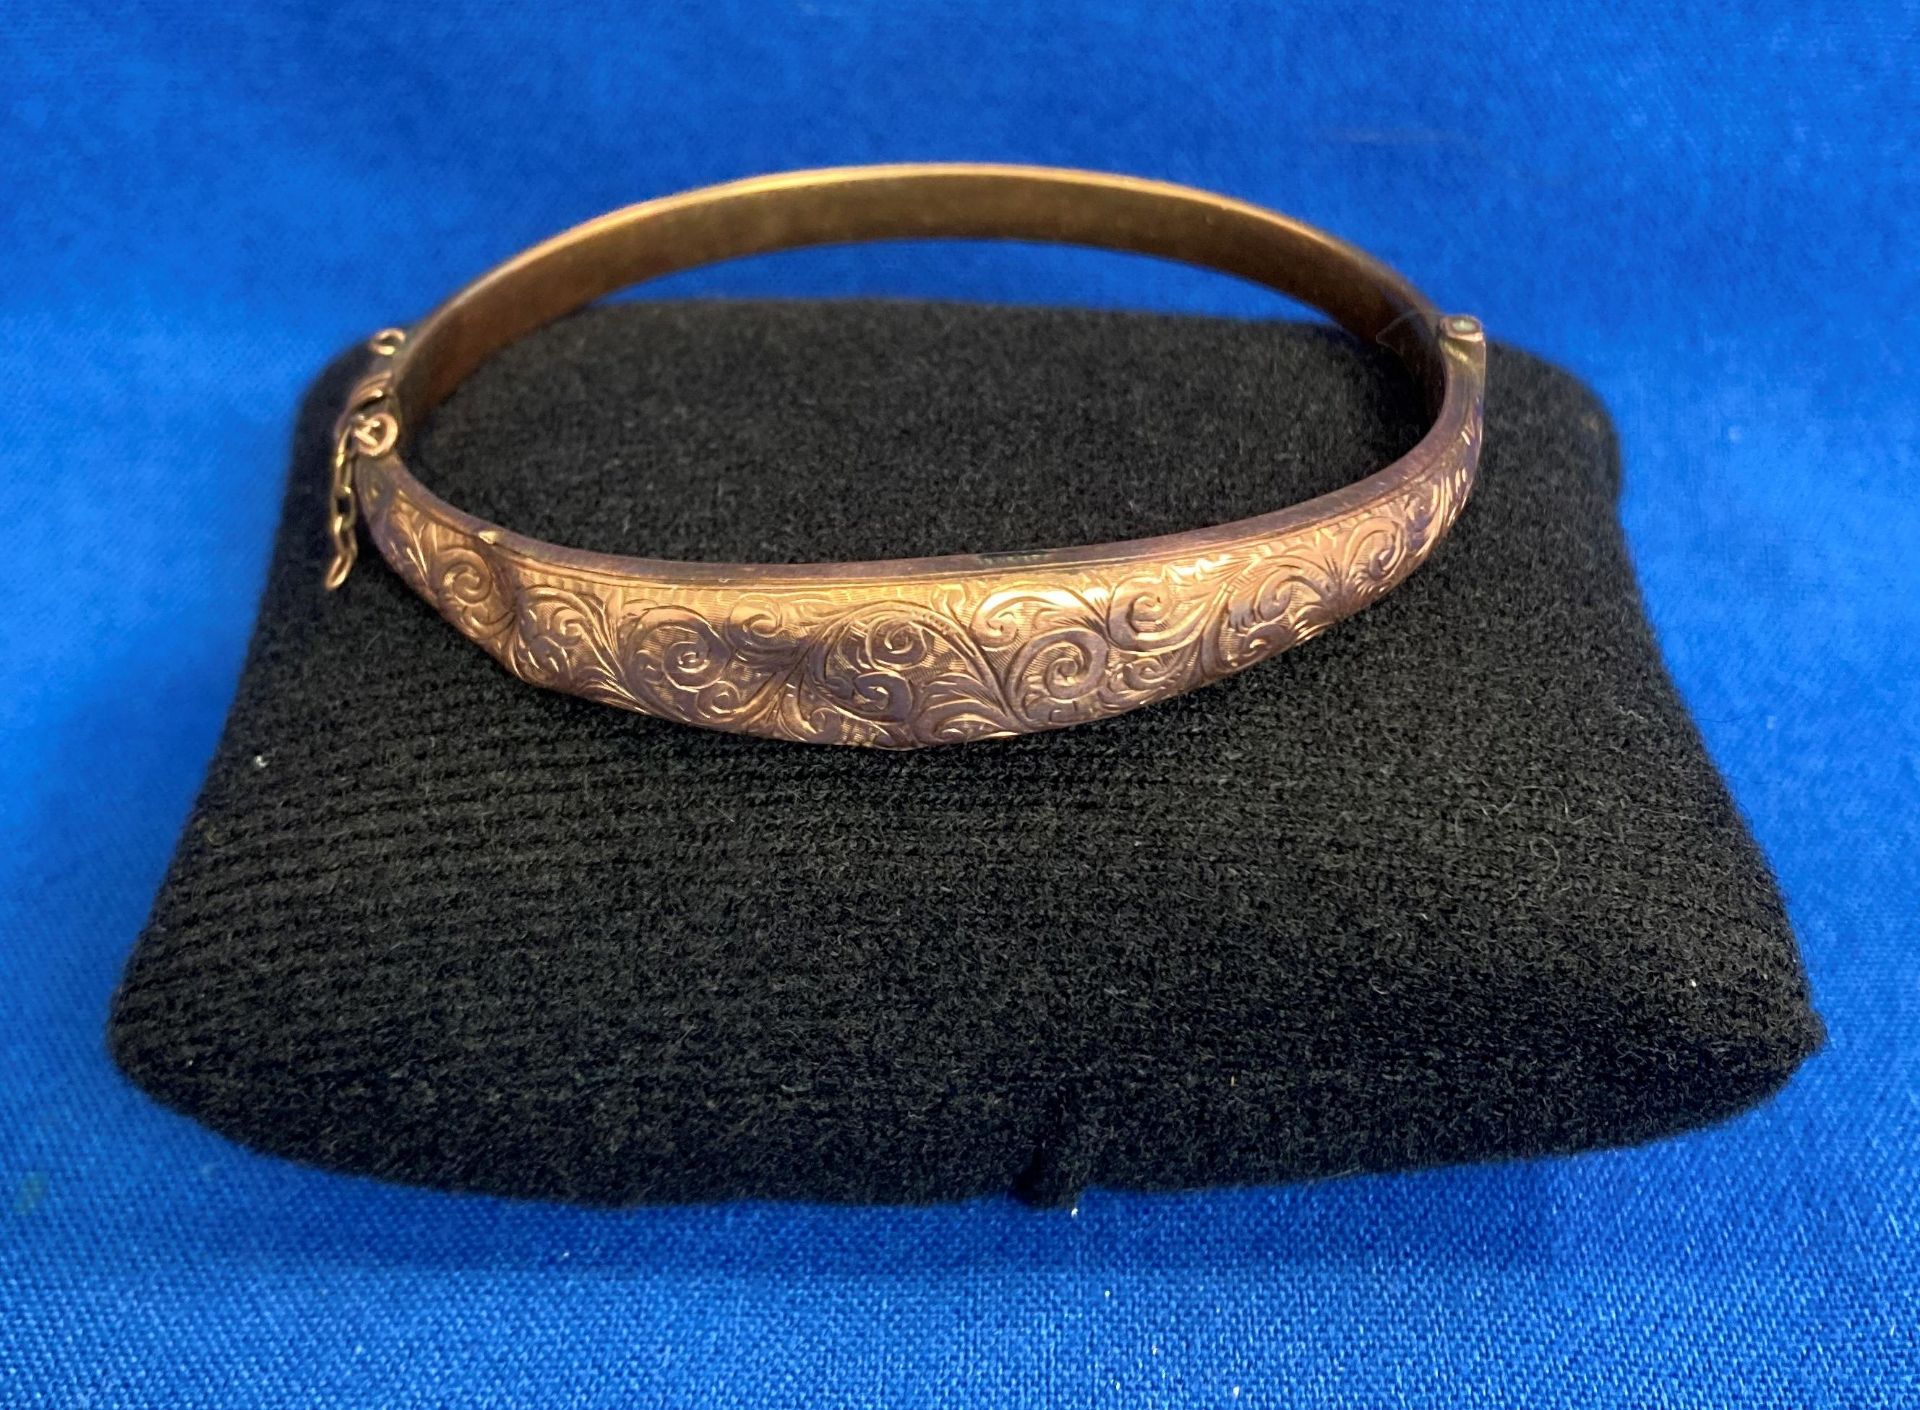 9ct gold (375) bangle with etched design and dents to top. Weight: 6.